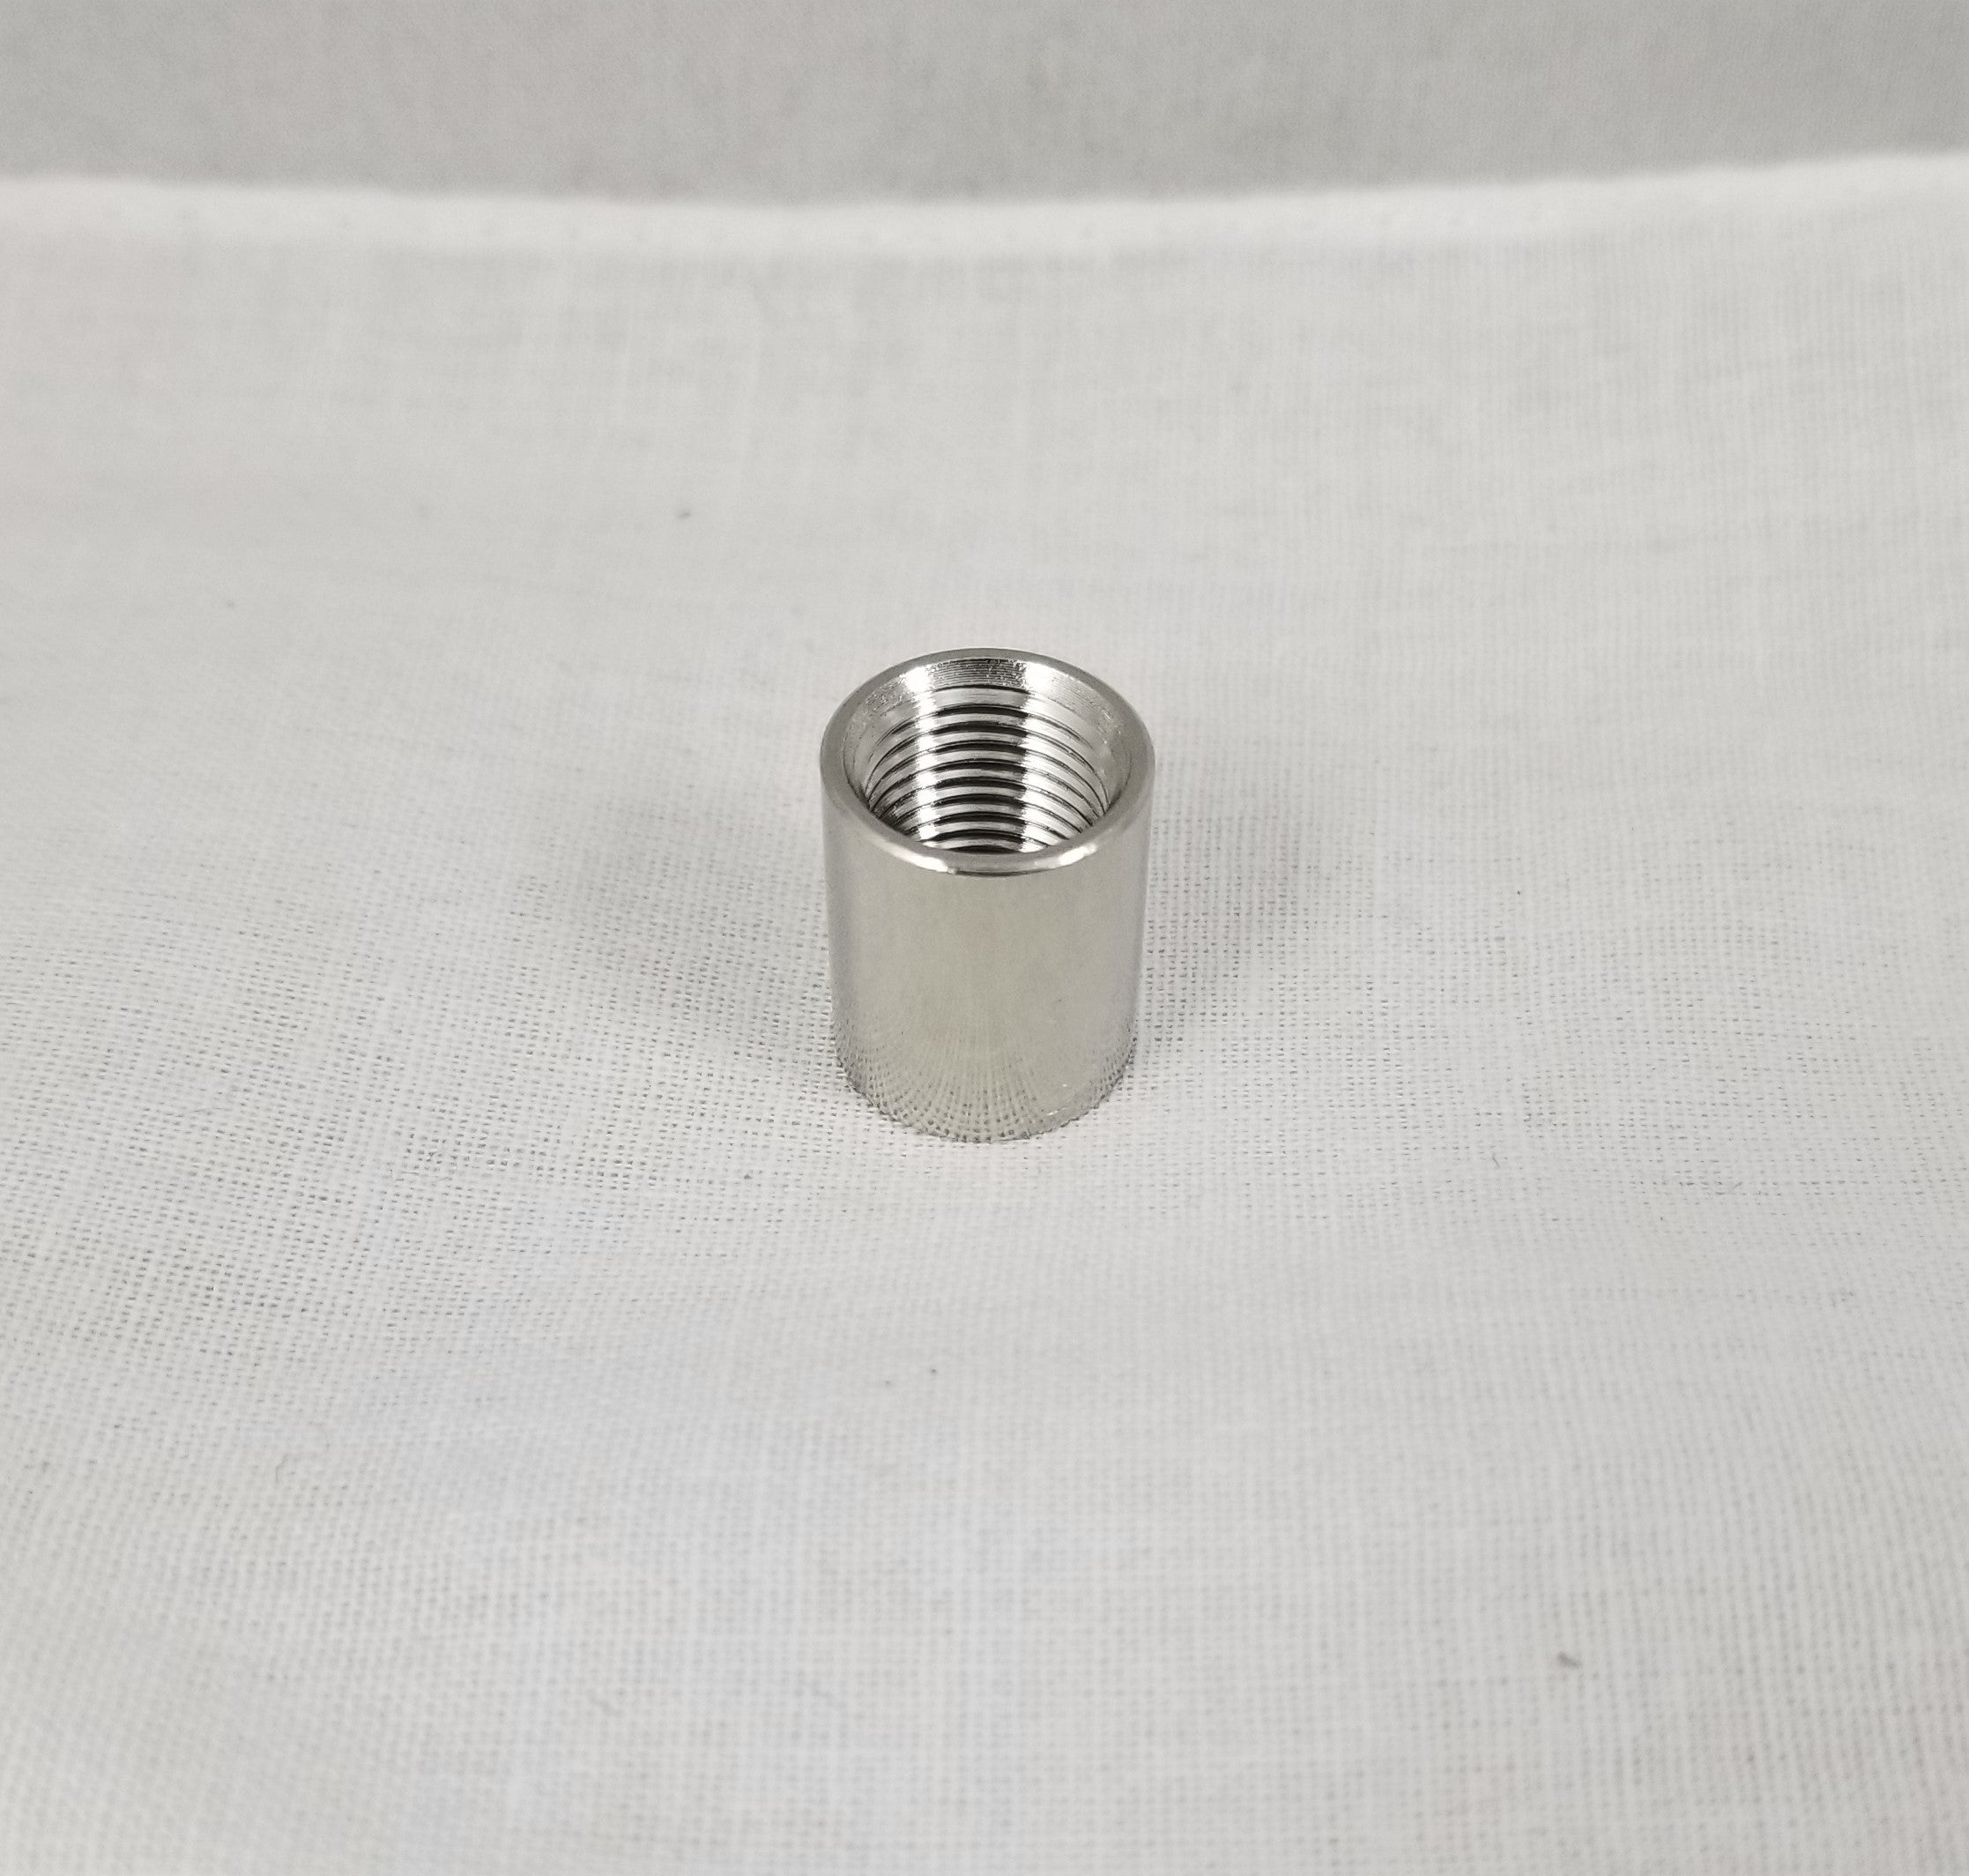 Nickel Plated Coupling Tapped 1/8 IPS